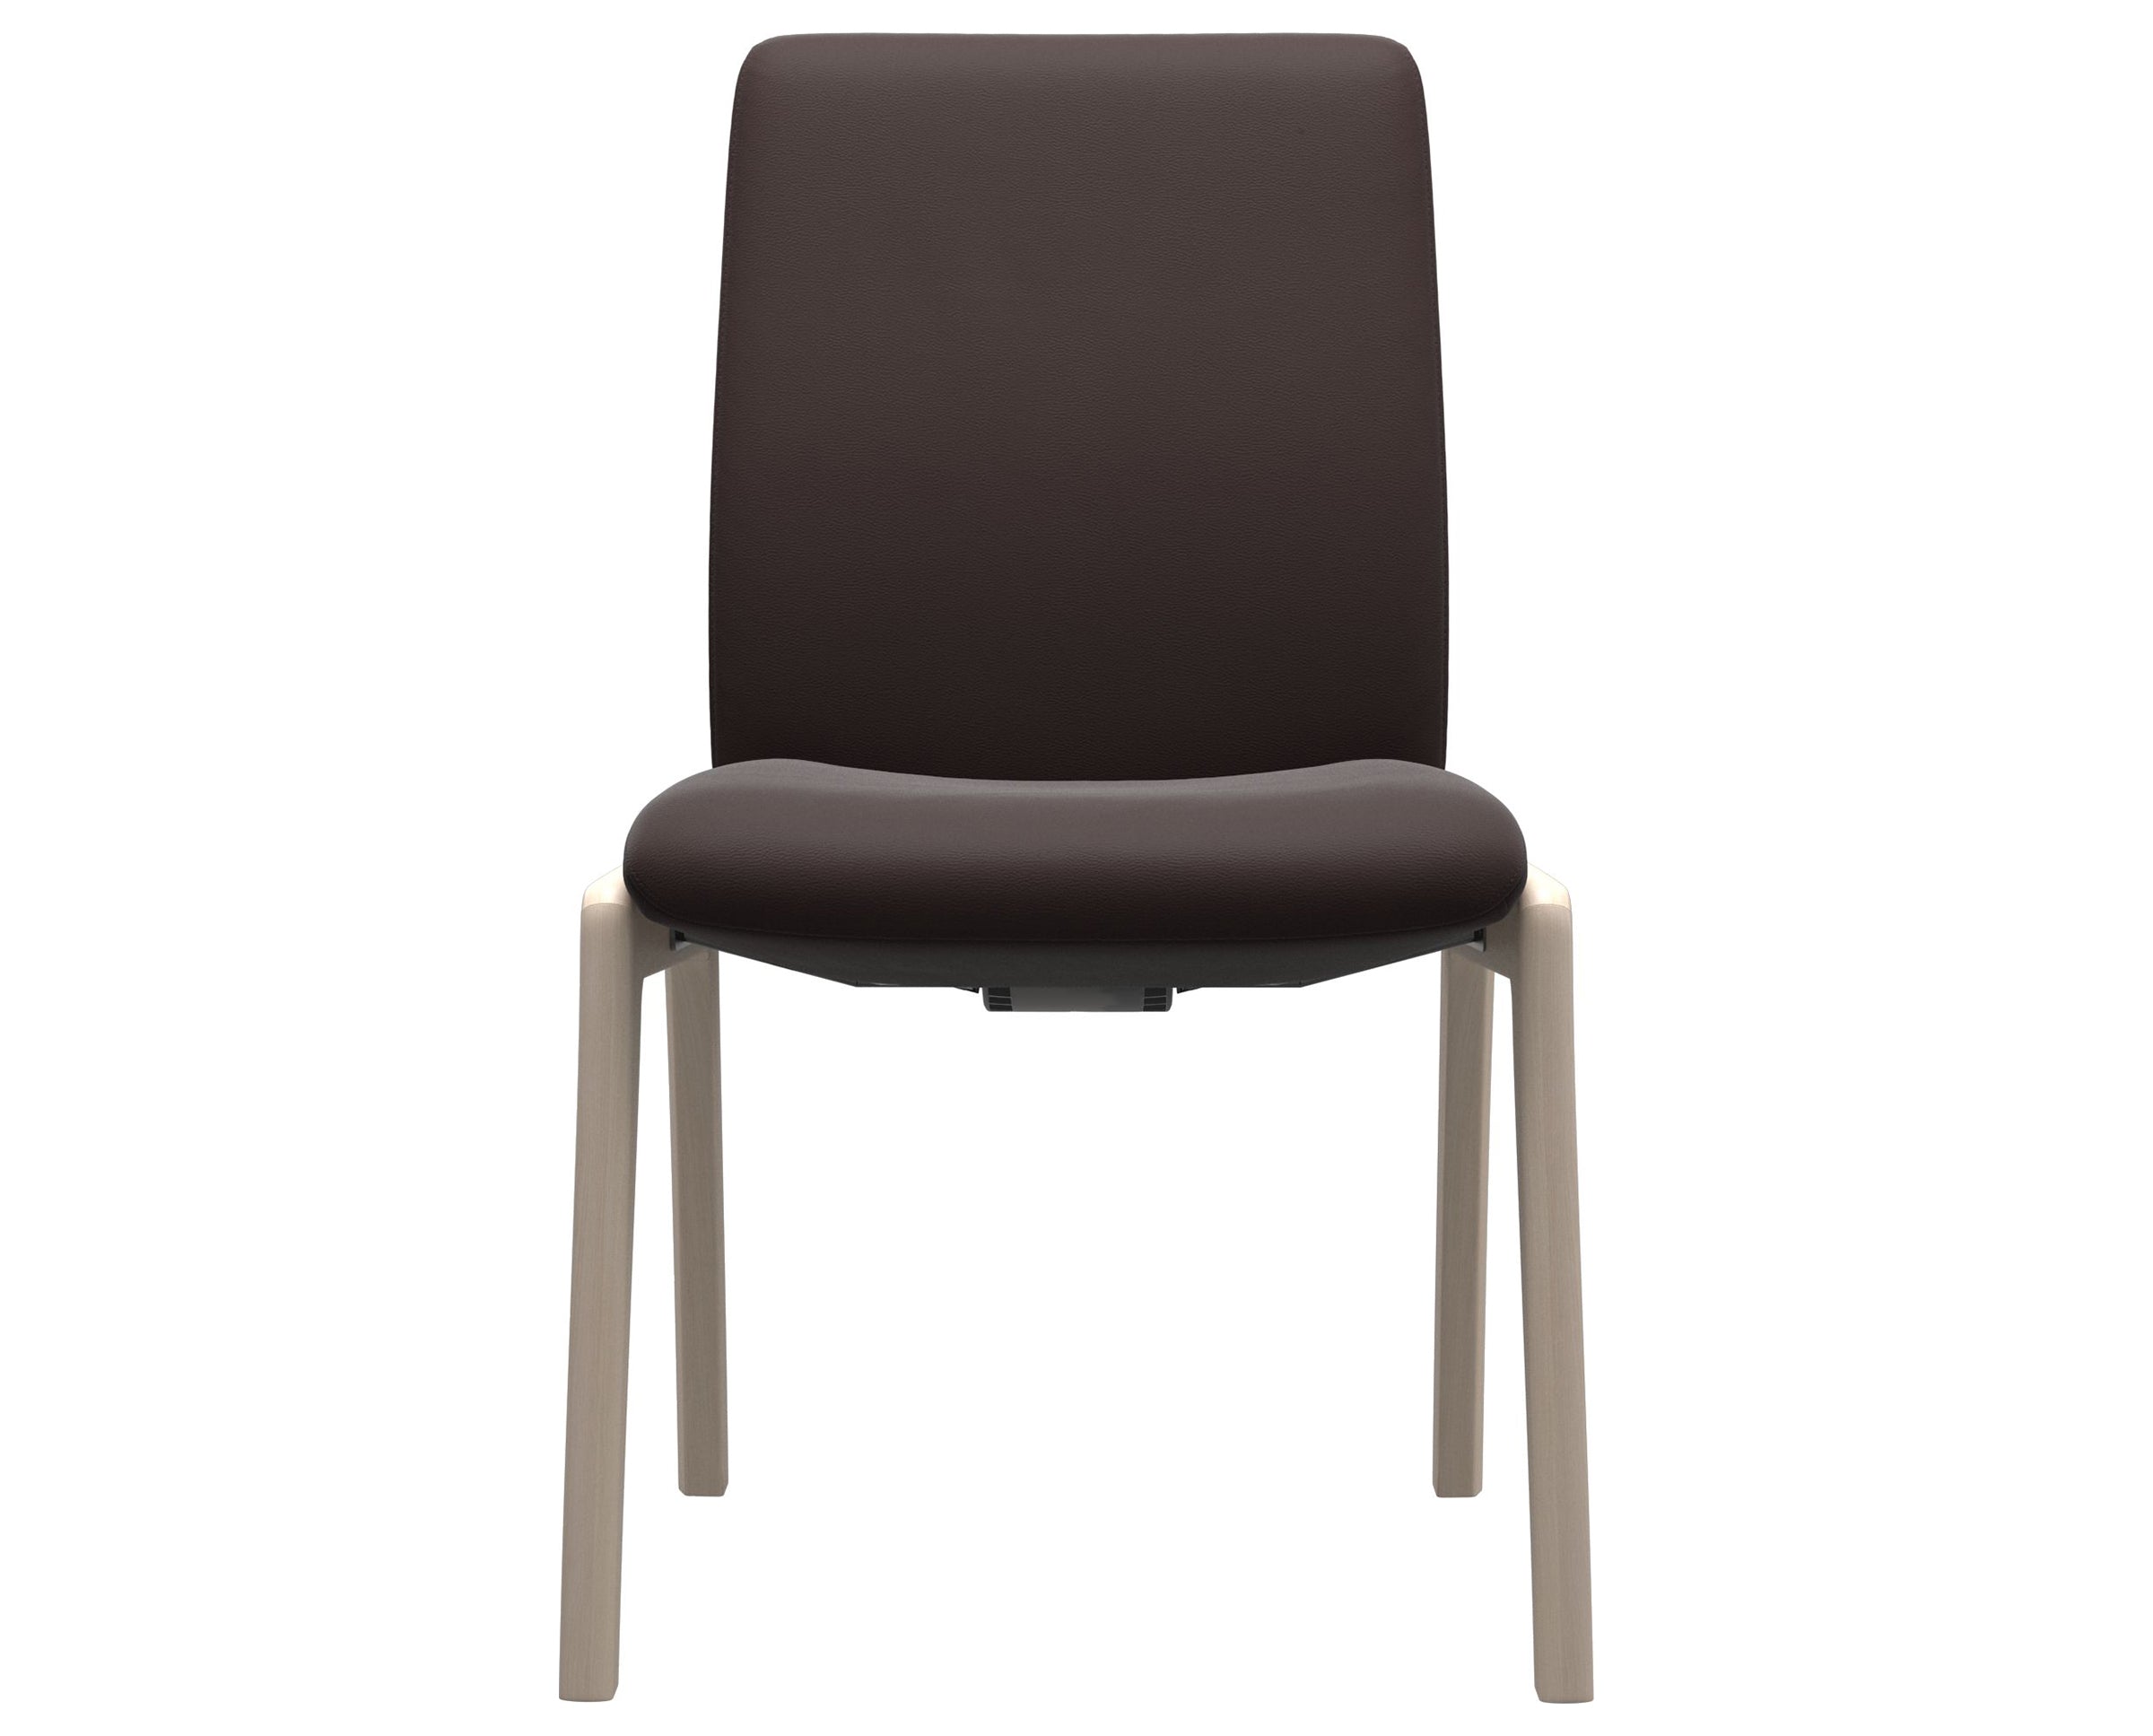 Paloma Leather Chocolate and Whitewash Base | Stressless Laurel Low Back D100 Dining Chair | Valley Ridge Furniture